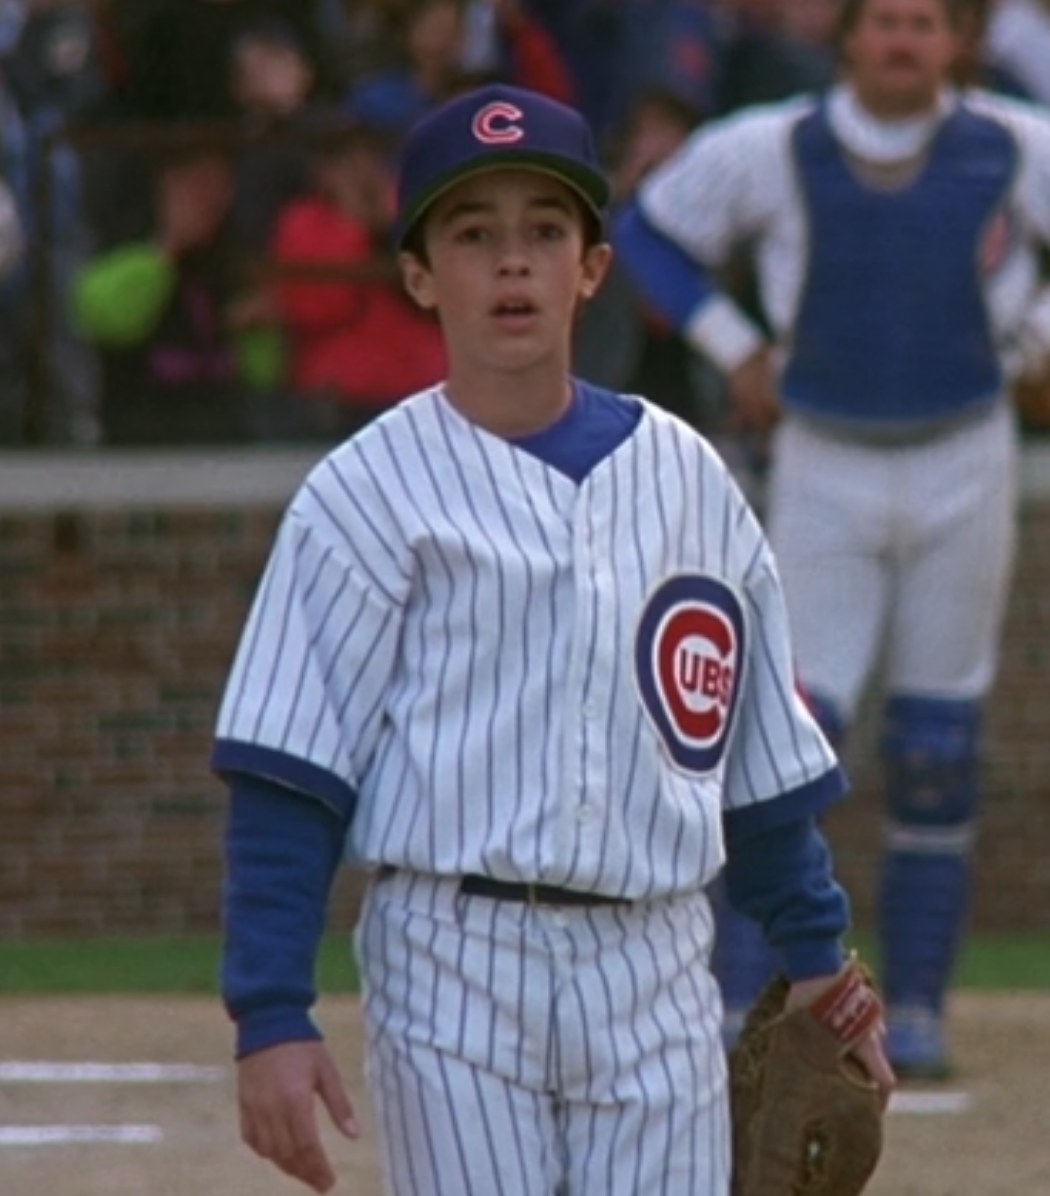 Thomas Ian Nicholas as Henry pitches in a Cubs game